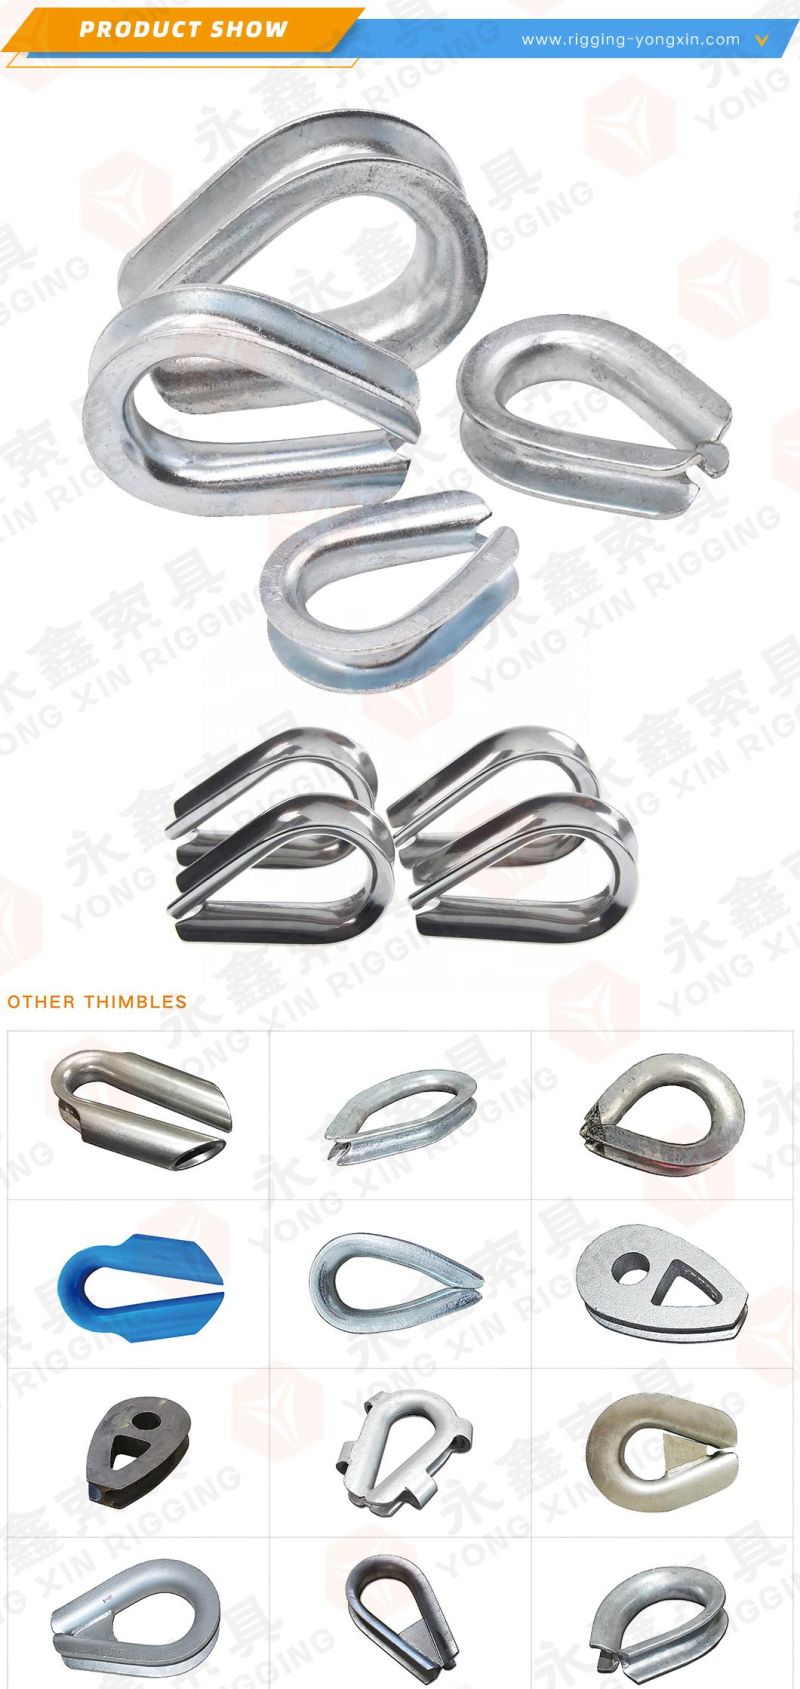 Hot Sale Rigging Hardware Cable Fittings Stainless Steel 316 Us Type G411 Wire Rope Thimbles